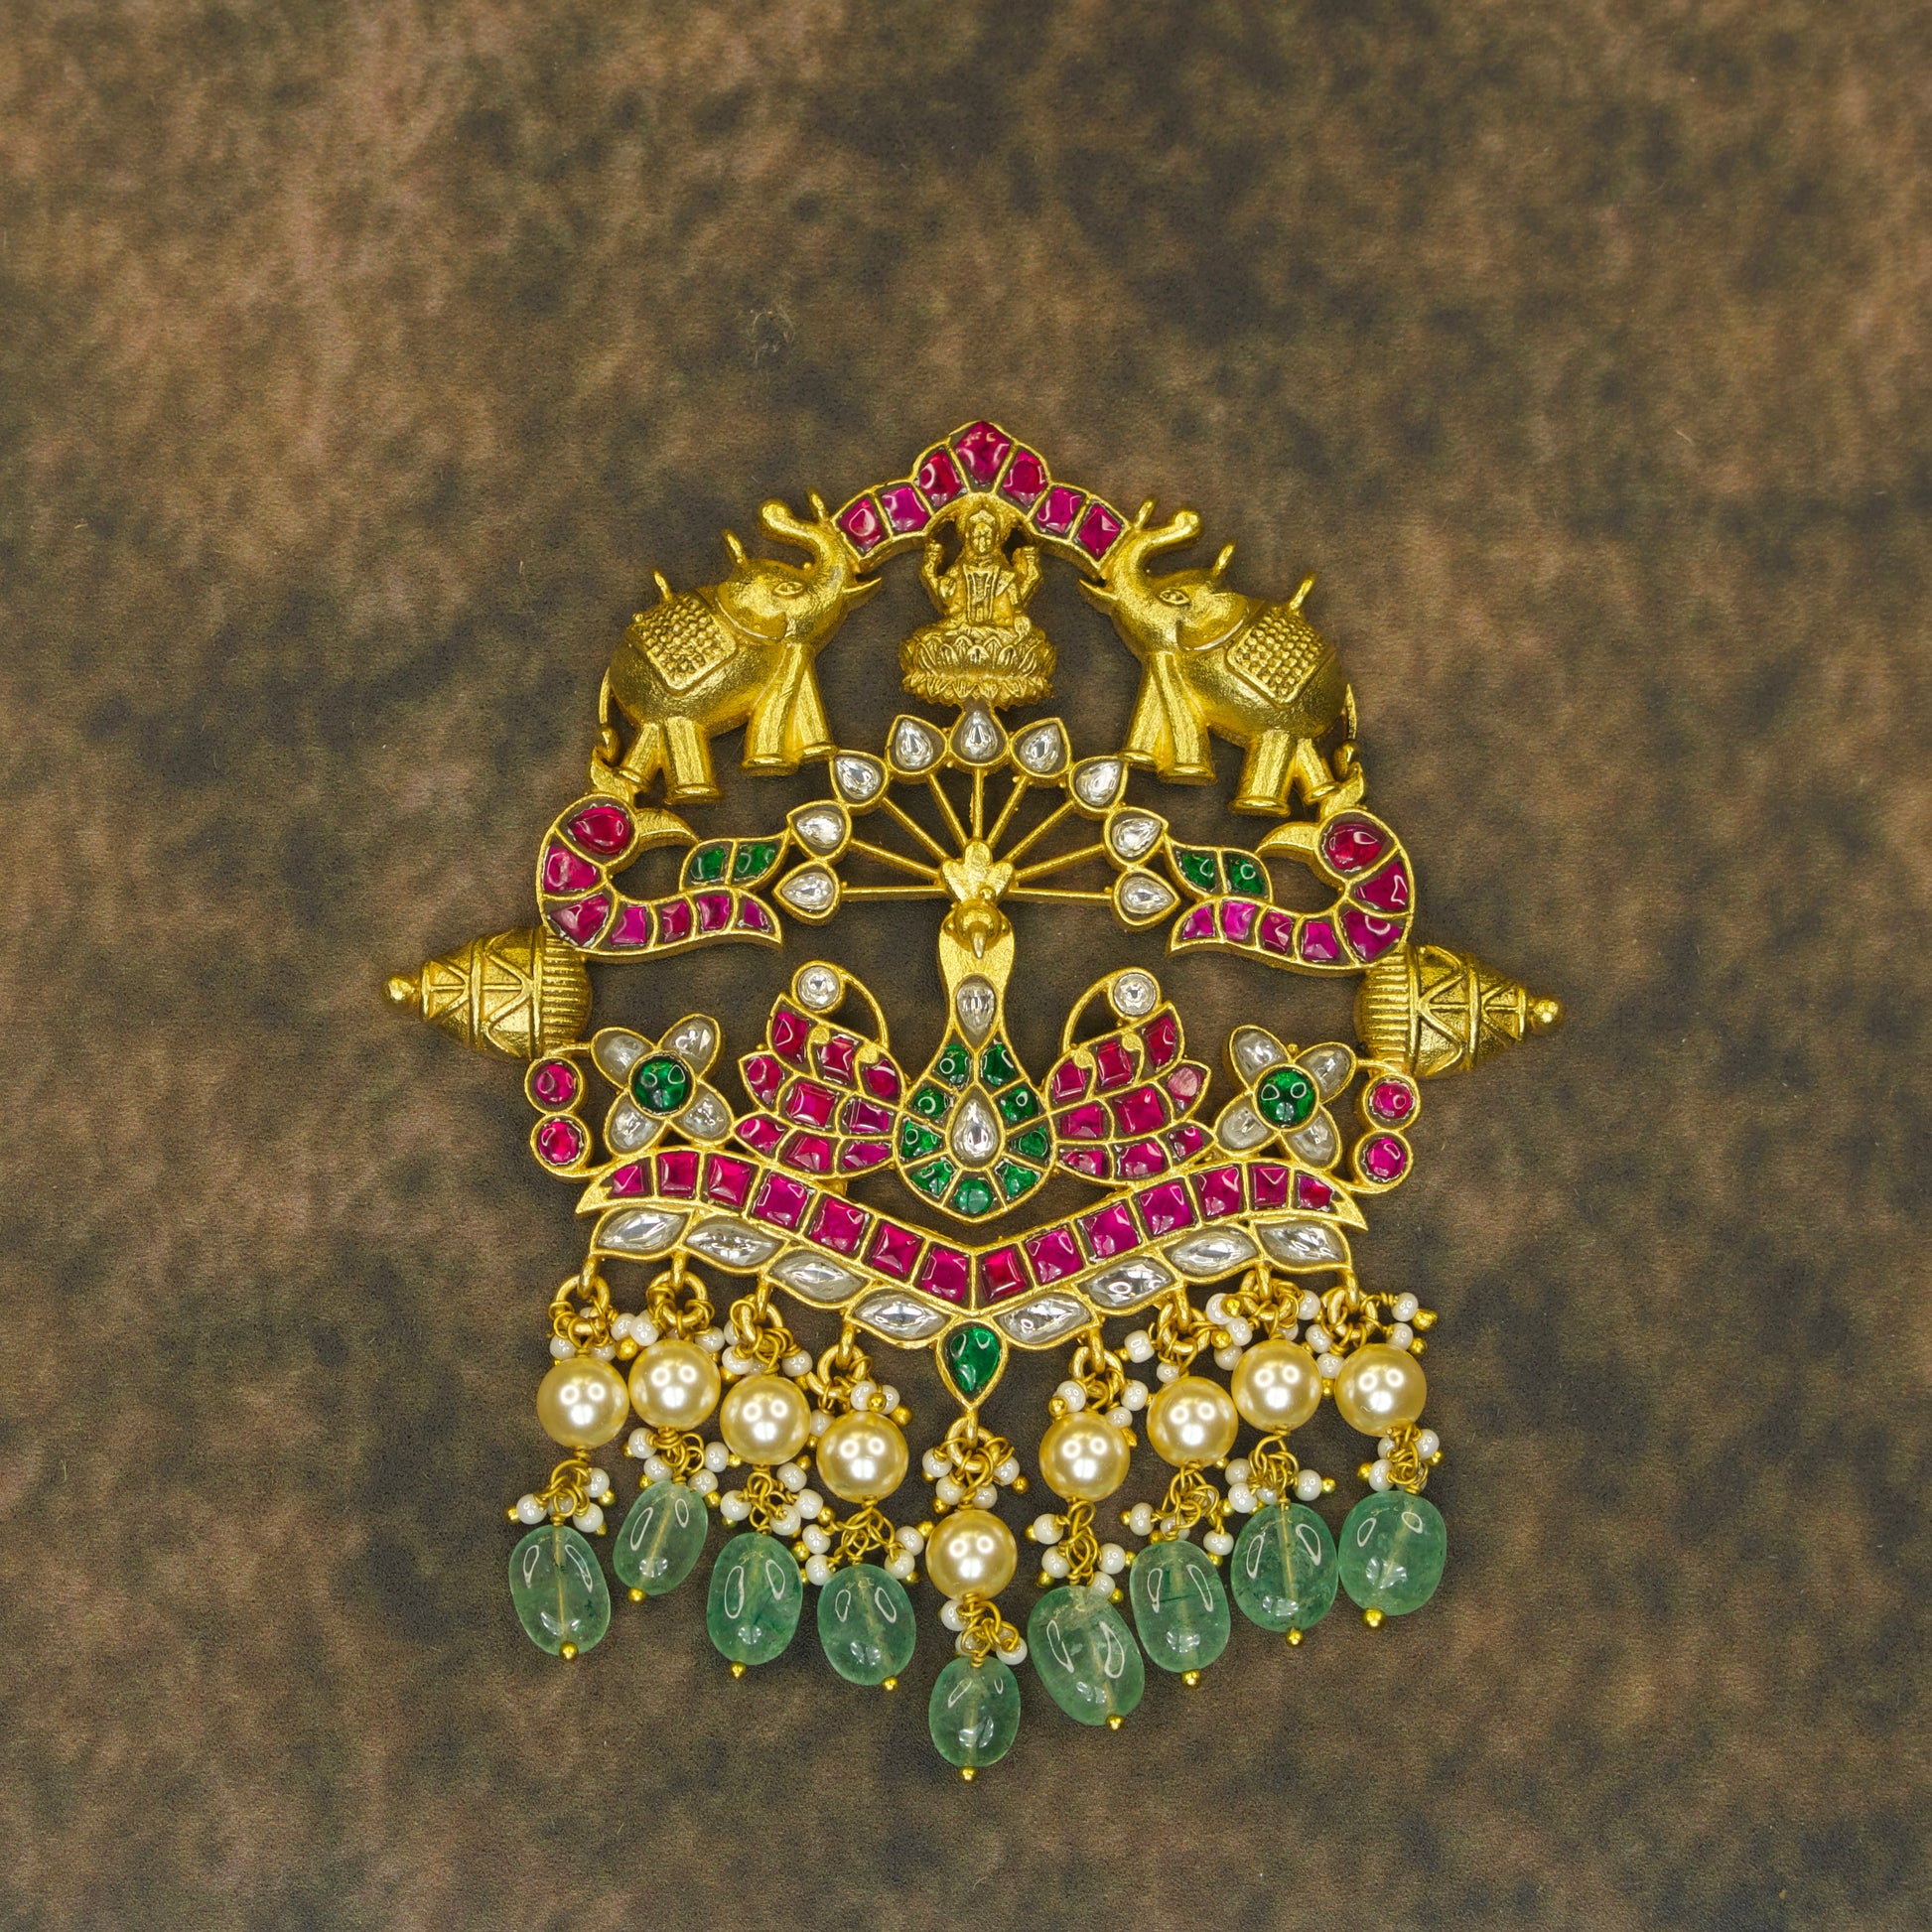 Handcrafted Jadau Kundan Pendant, with uncut Ruby and Emerald gemstones, pearls, beads, elephant & peacock motifs, in a 22k gold plating. 